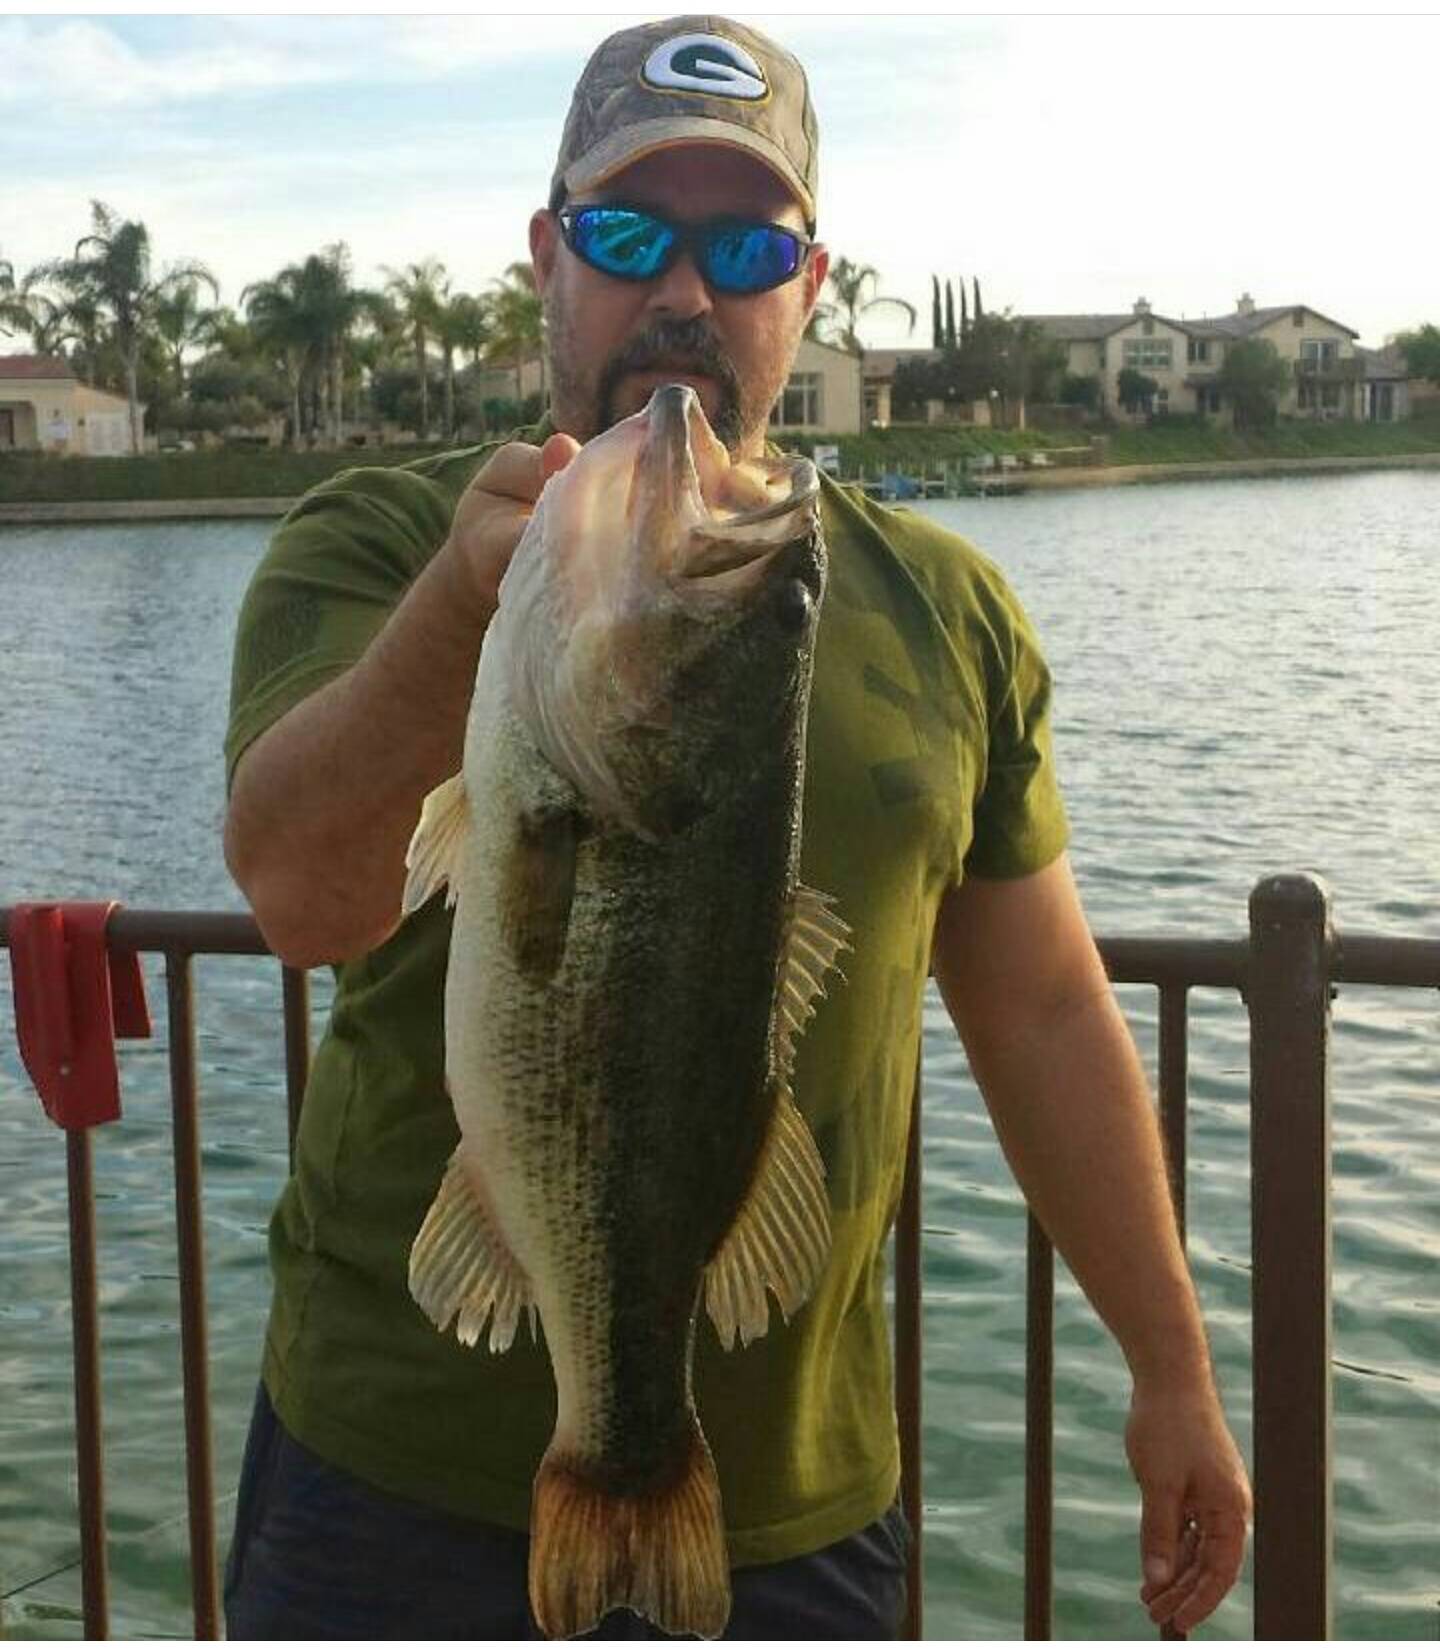 Just a bass by in-laws house